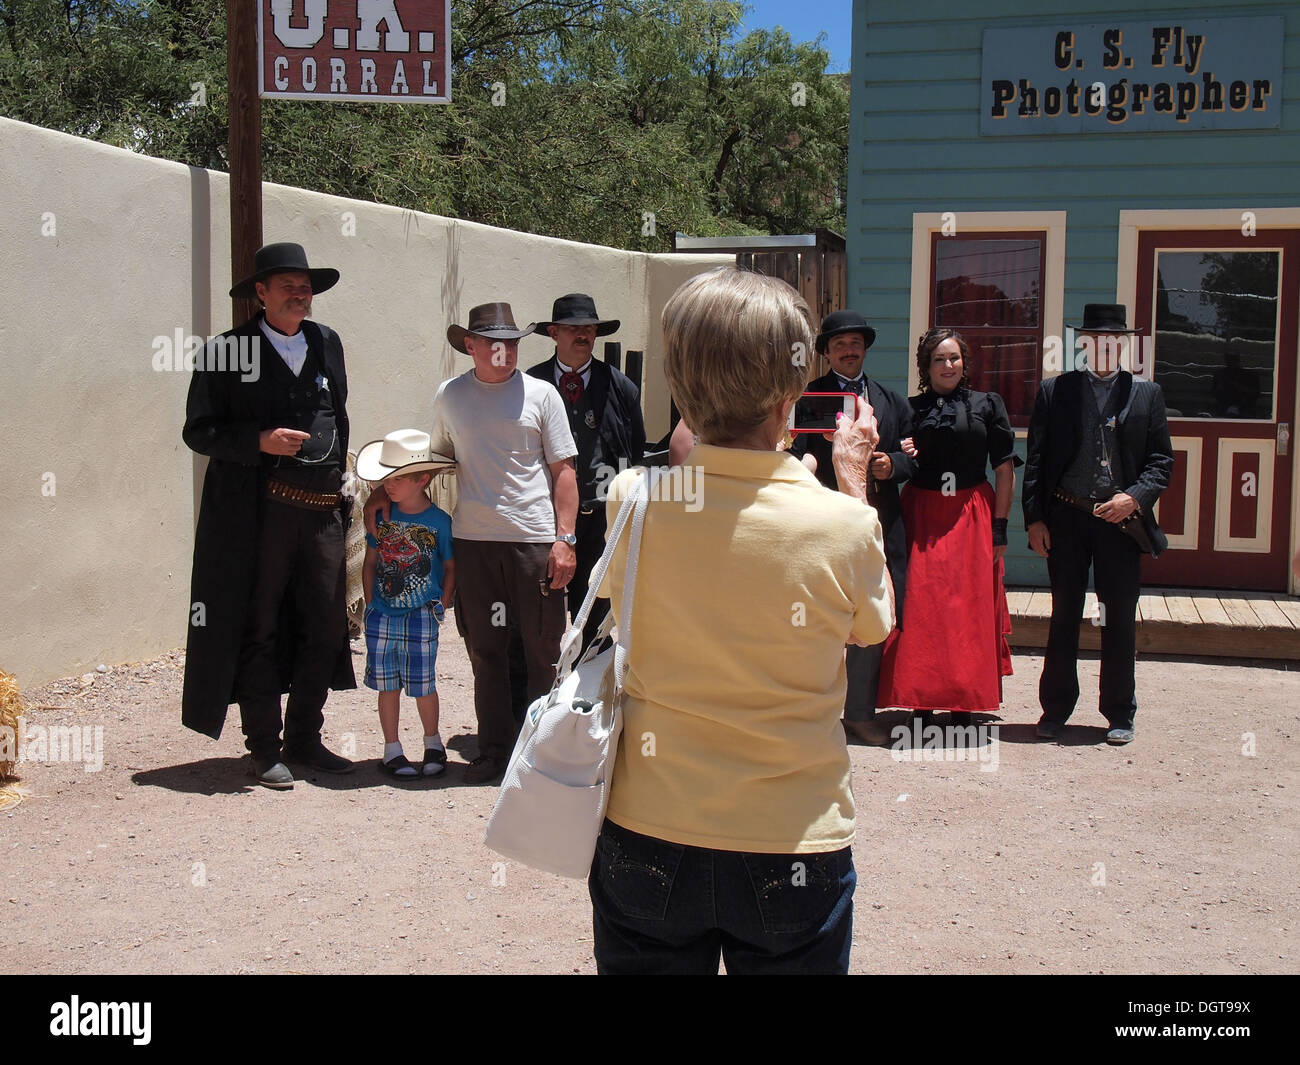 Tourist taking a snapshot of the actors and her family at the famous O.K. Corral in Tombstone, Arizona, USA Stock Photo